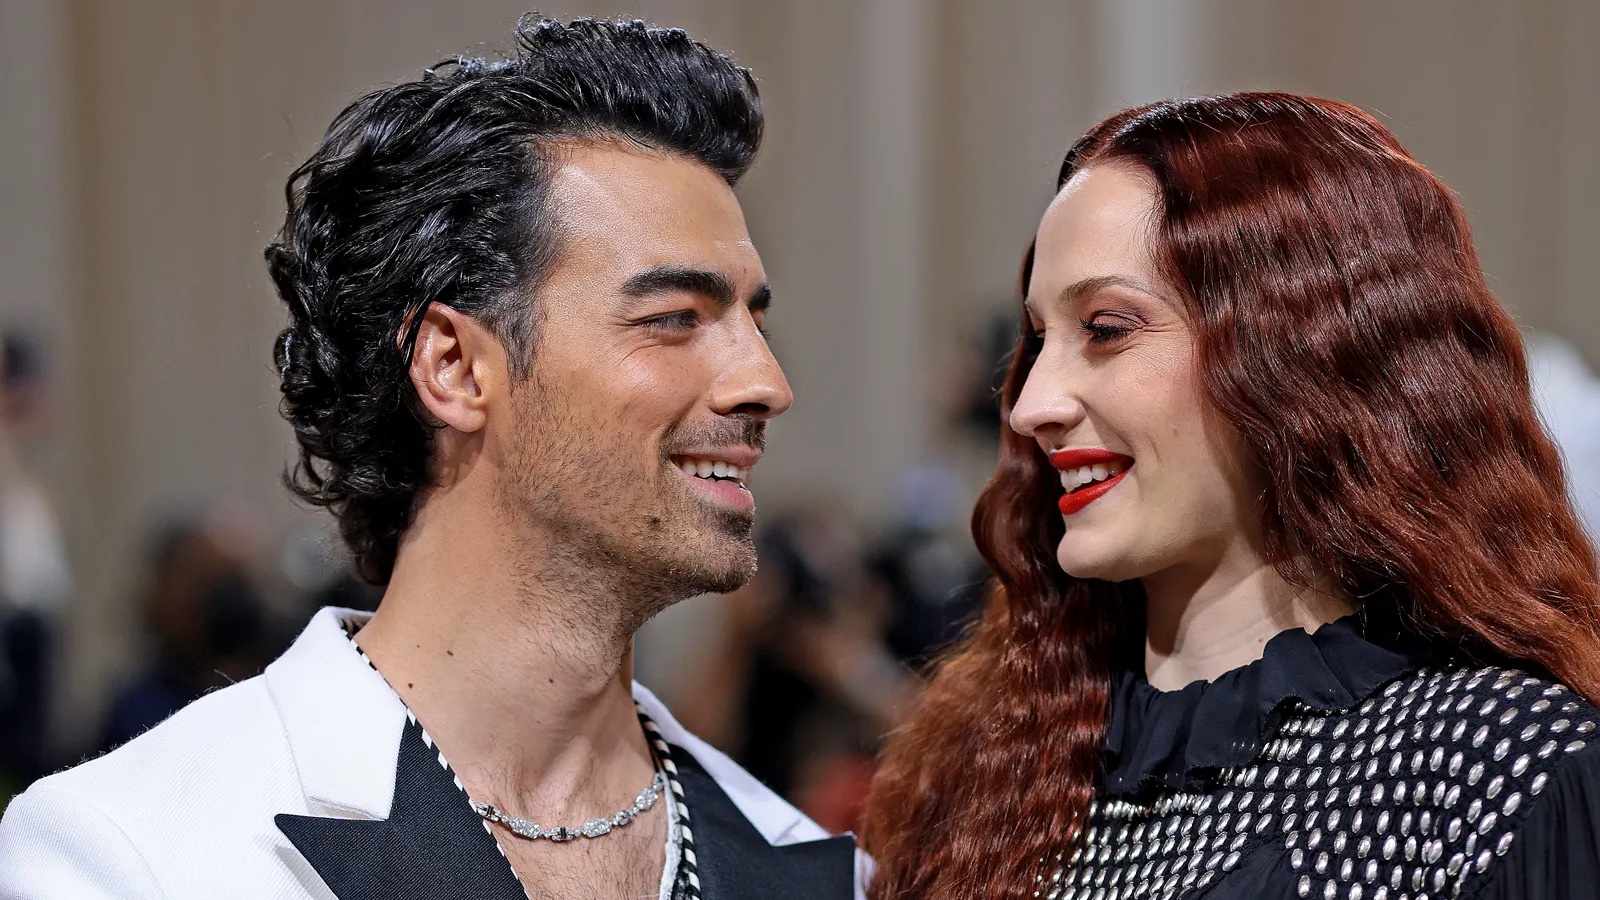 Sophie Turner and Joe Jonas have been living apart for months